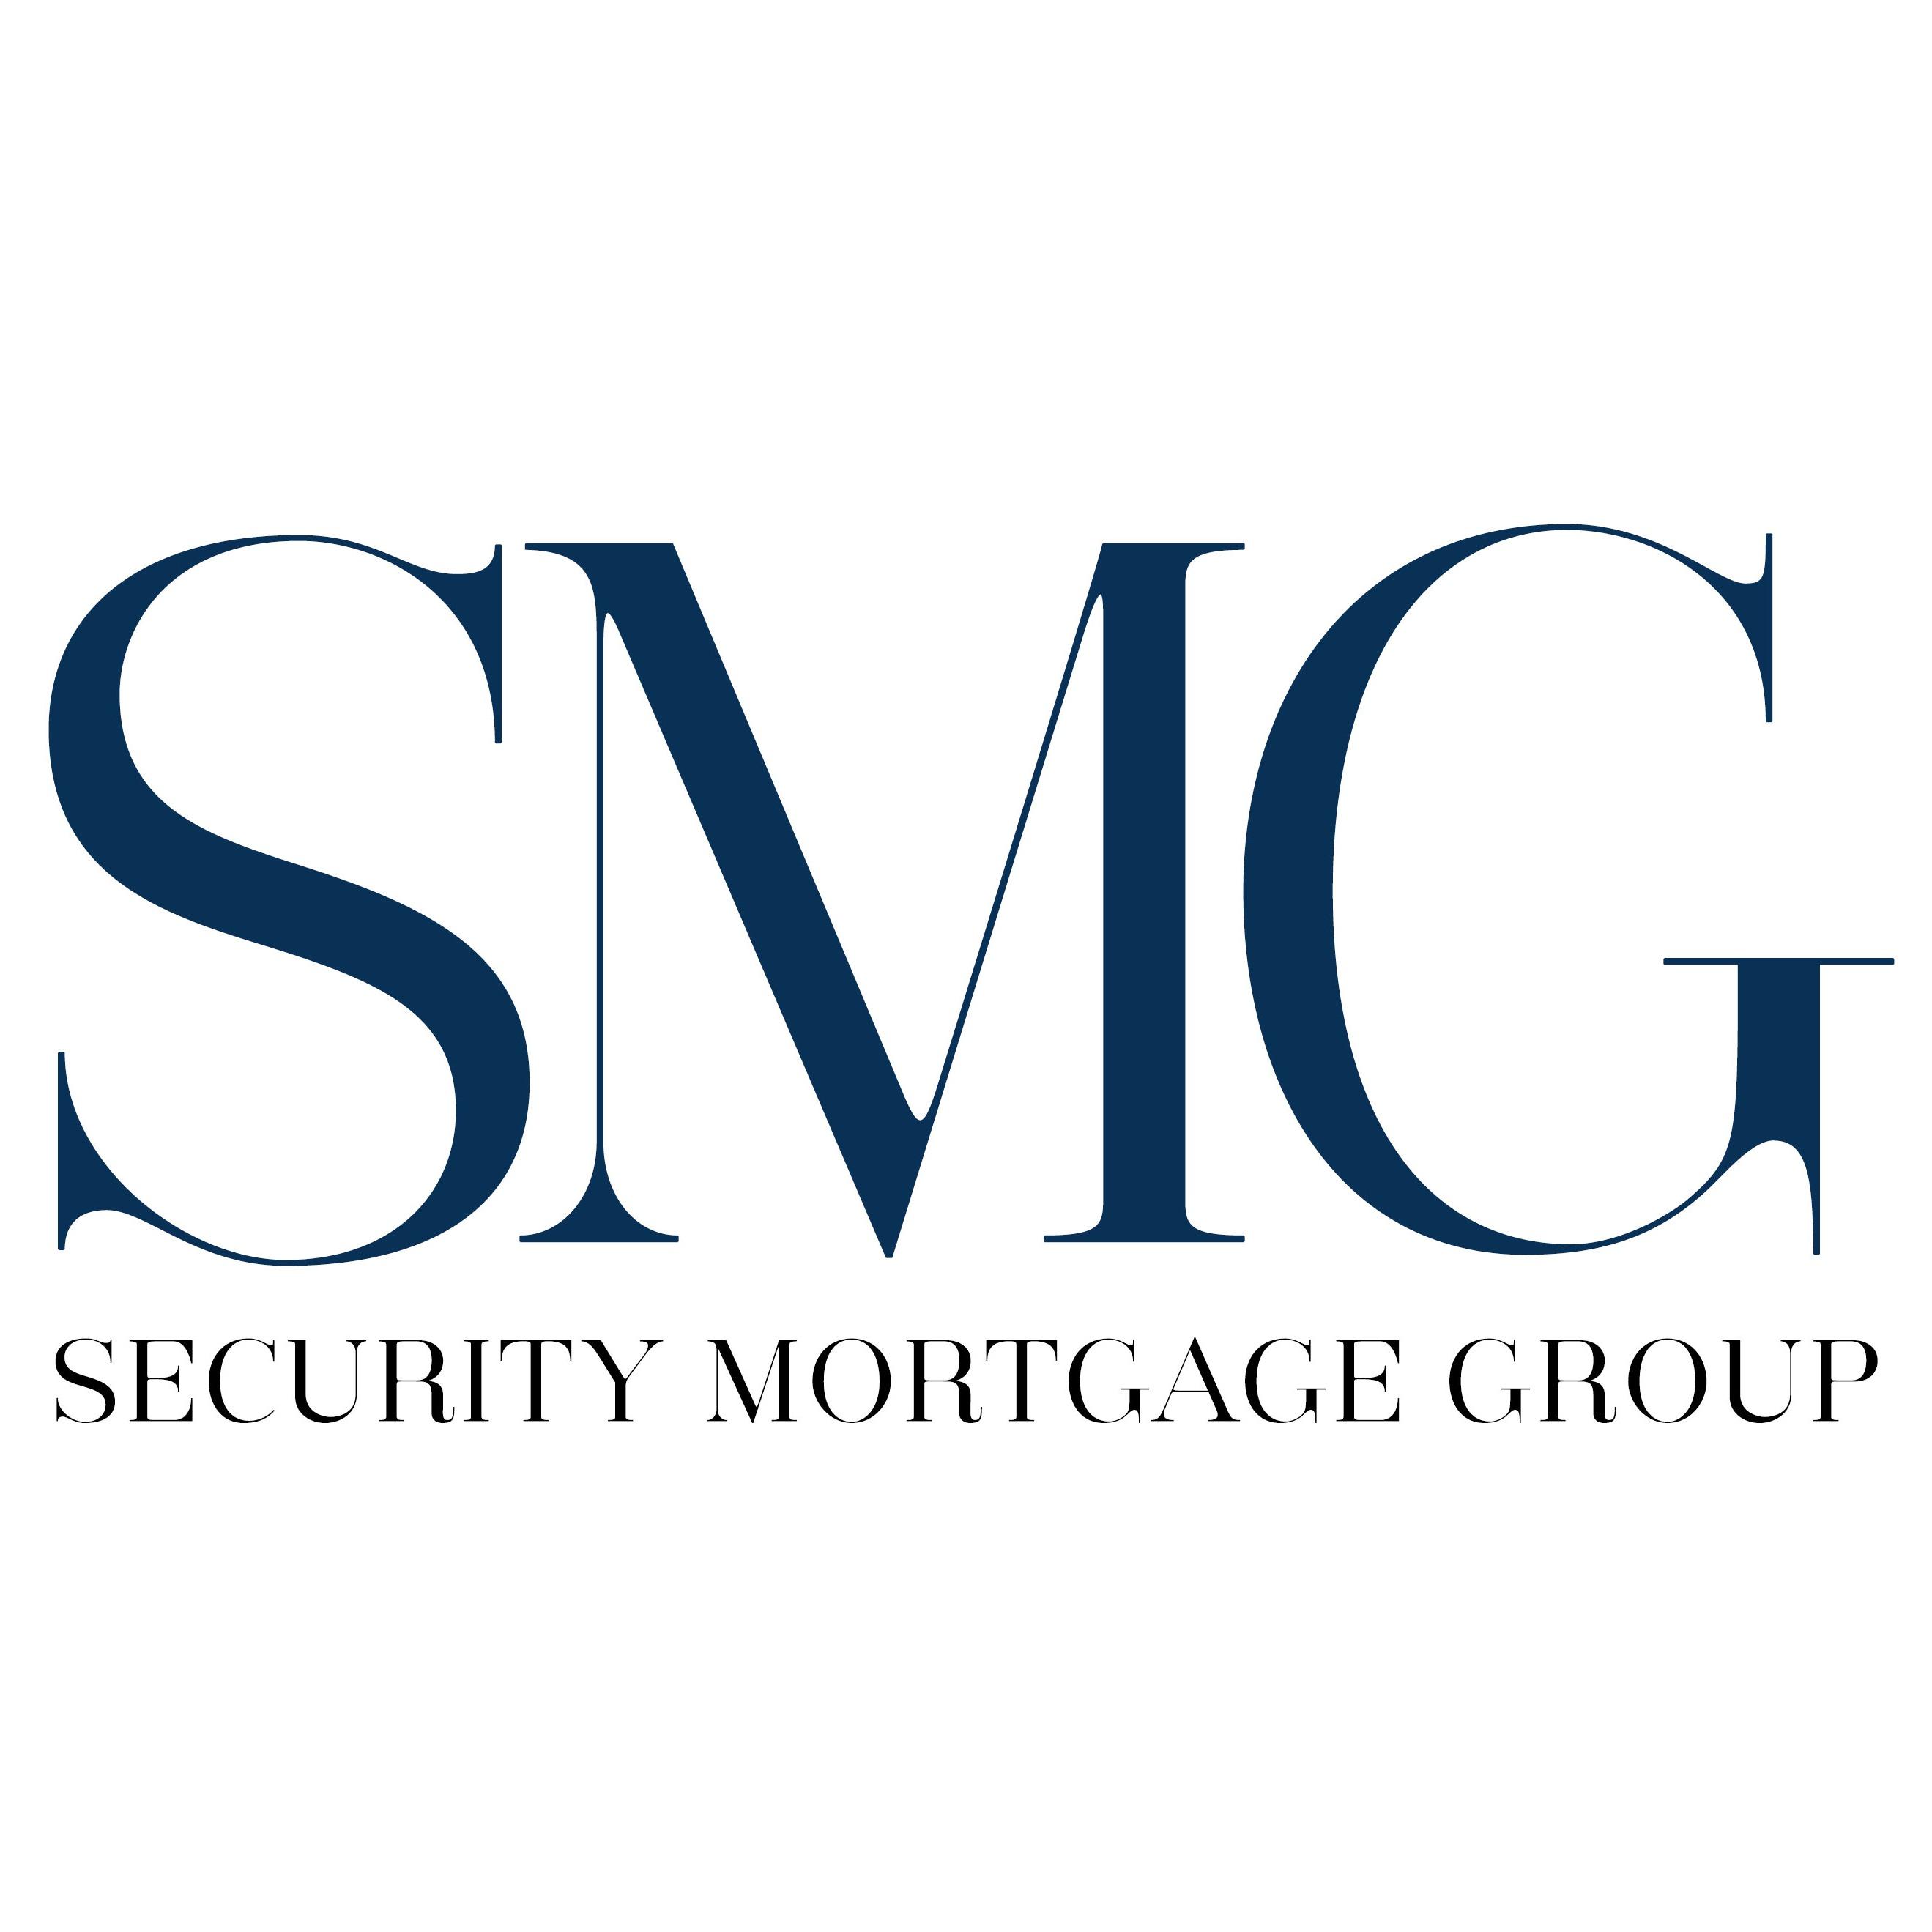 Security Mortgage Group - Rochester, NY 14618 - (585)423-0230 | ShowMeLocal.com